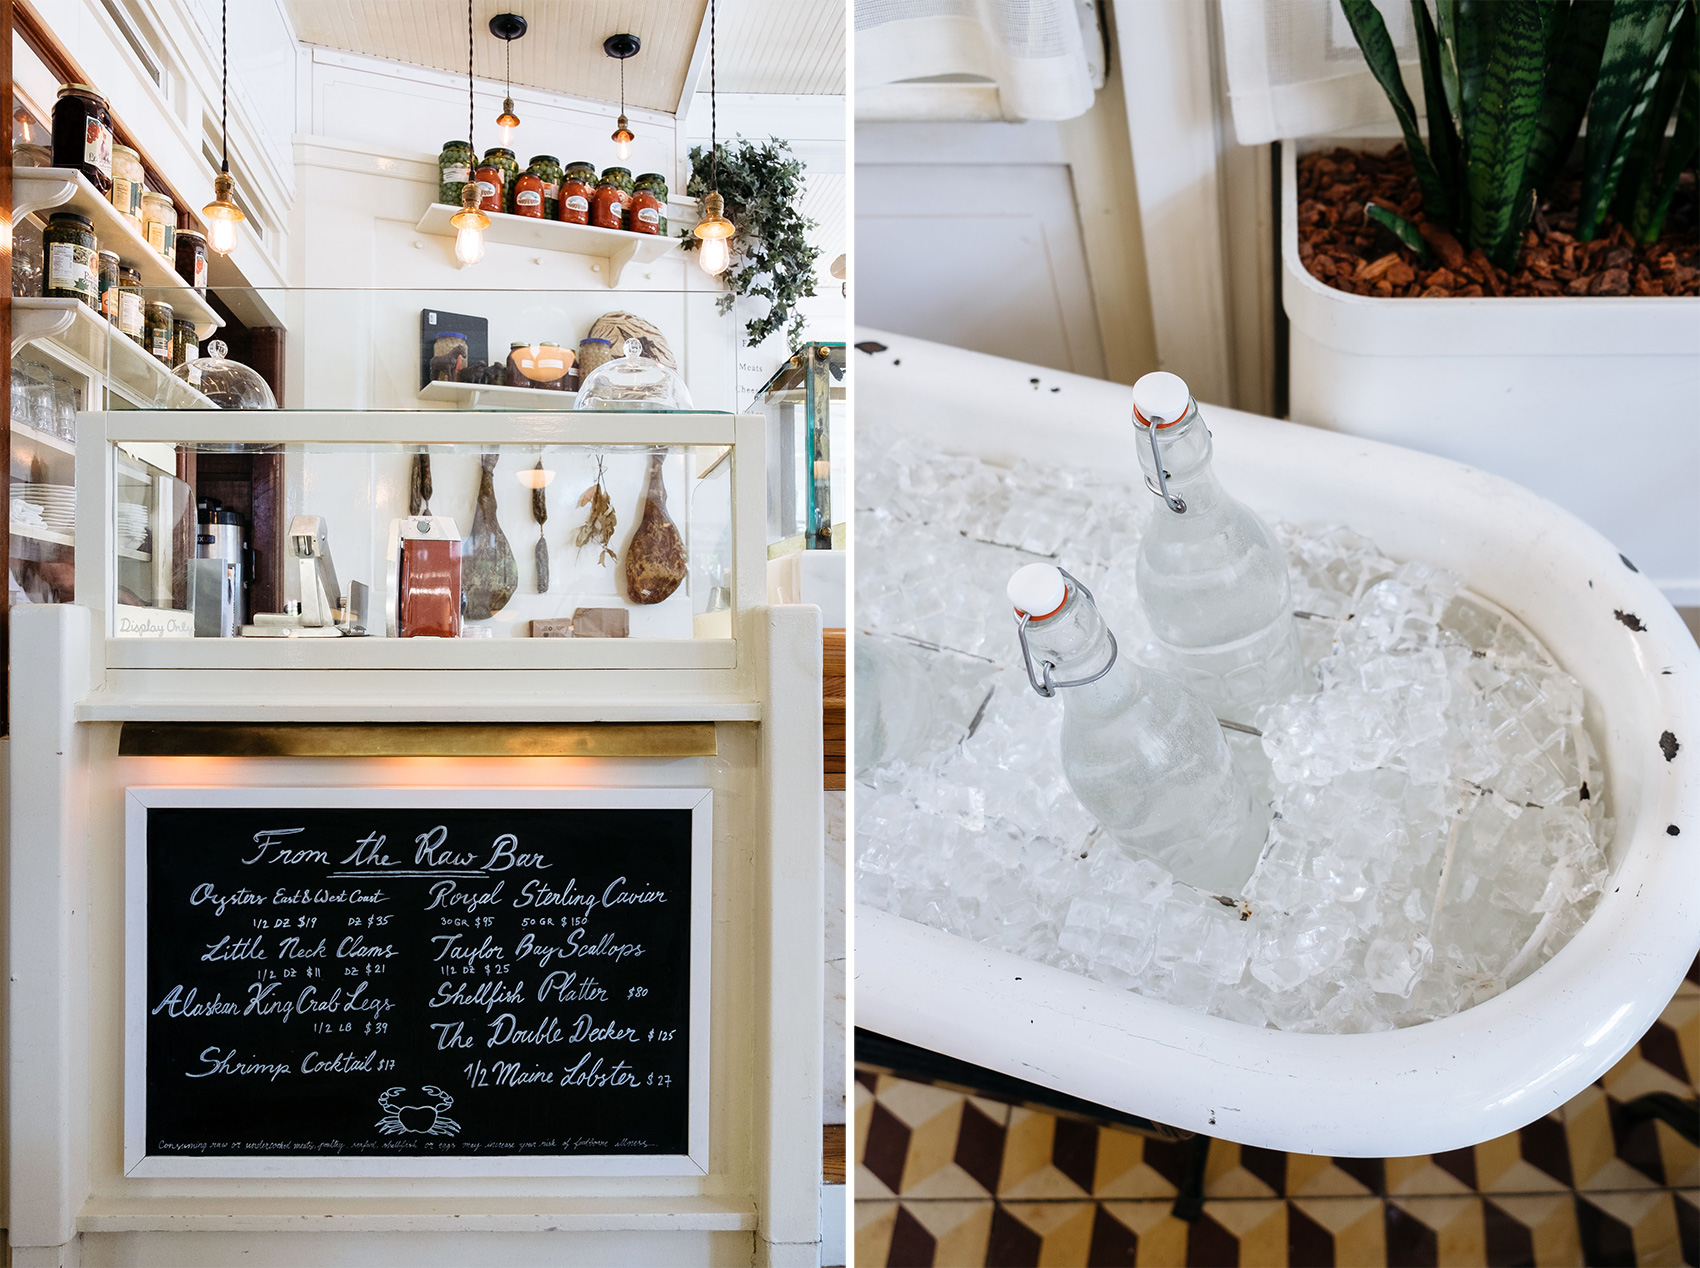 The Standard Raw Bar and bottle filled tub